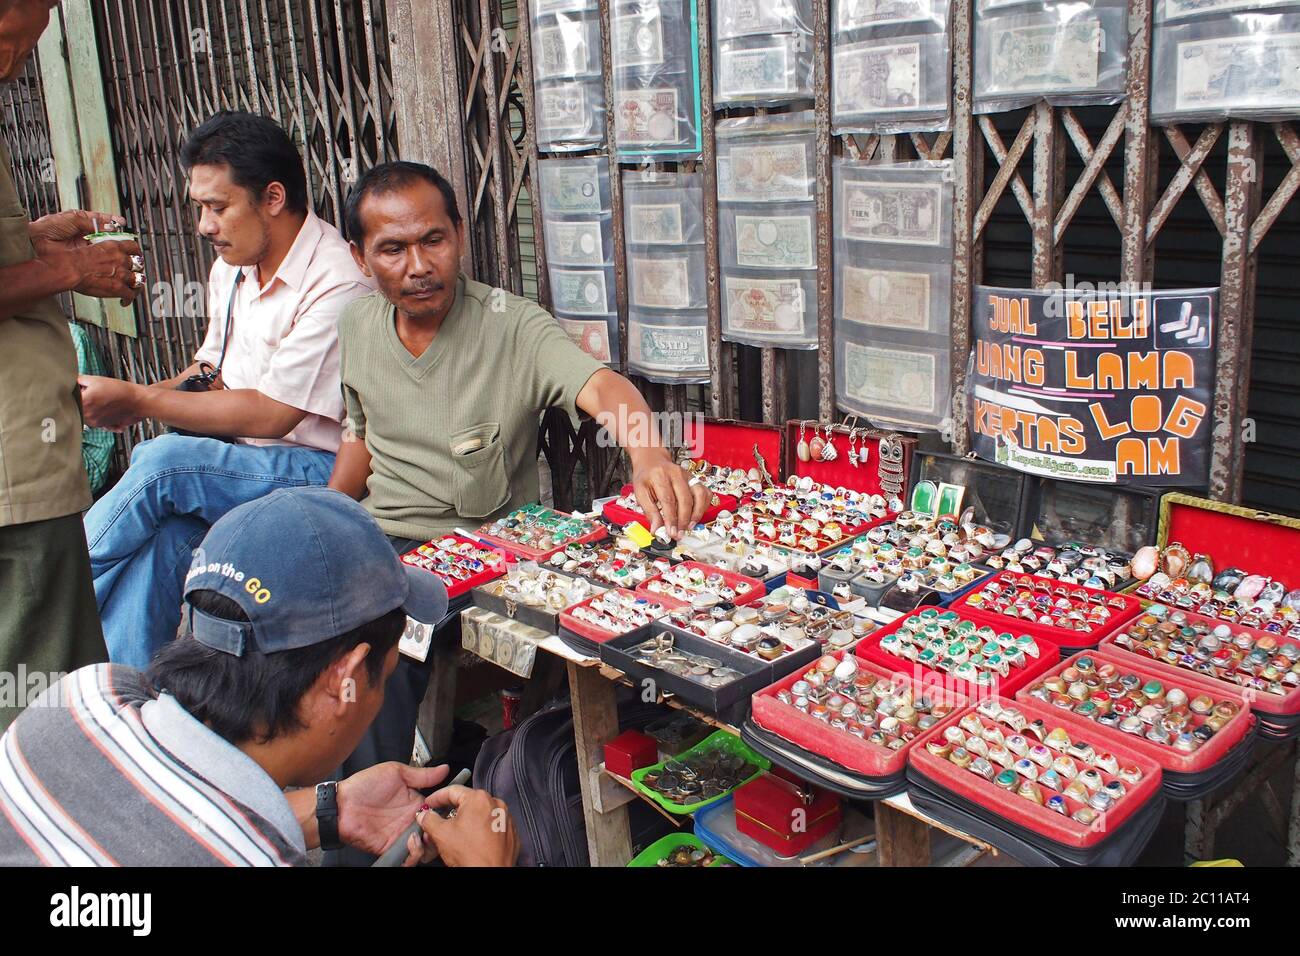 Bogor, West Java, Indonesia - December 28, 2013  : Antique traders selling on the sidewalk, peddling rings, agate and ancient money Stock Photo